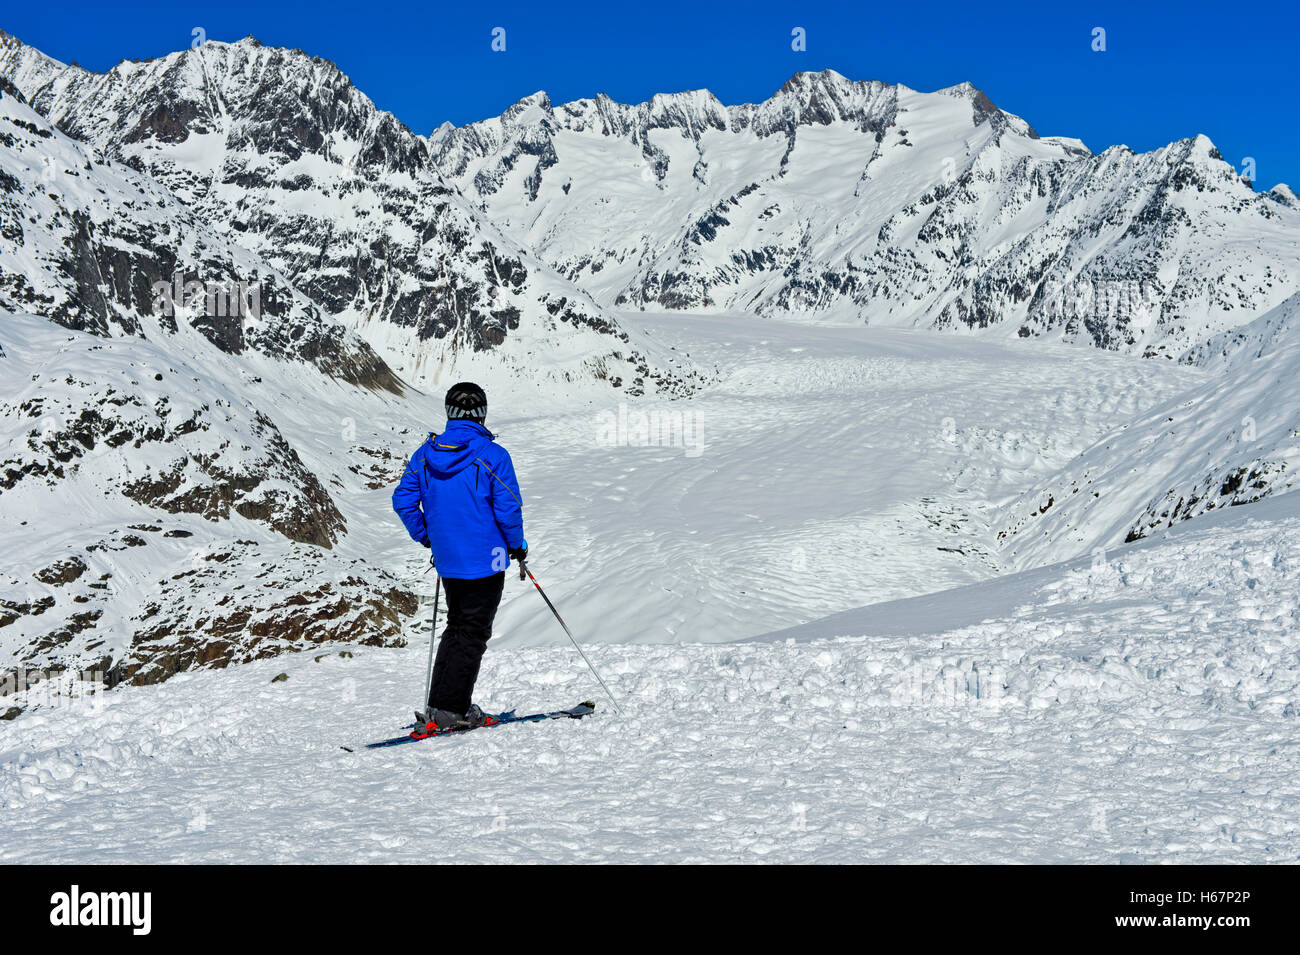 Skier looking from the viewpoint Moosfluh at the snow-covered Great Aletsch Glacier, Riederalp, Valais, Switzerland Stock Photo